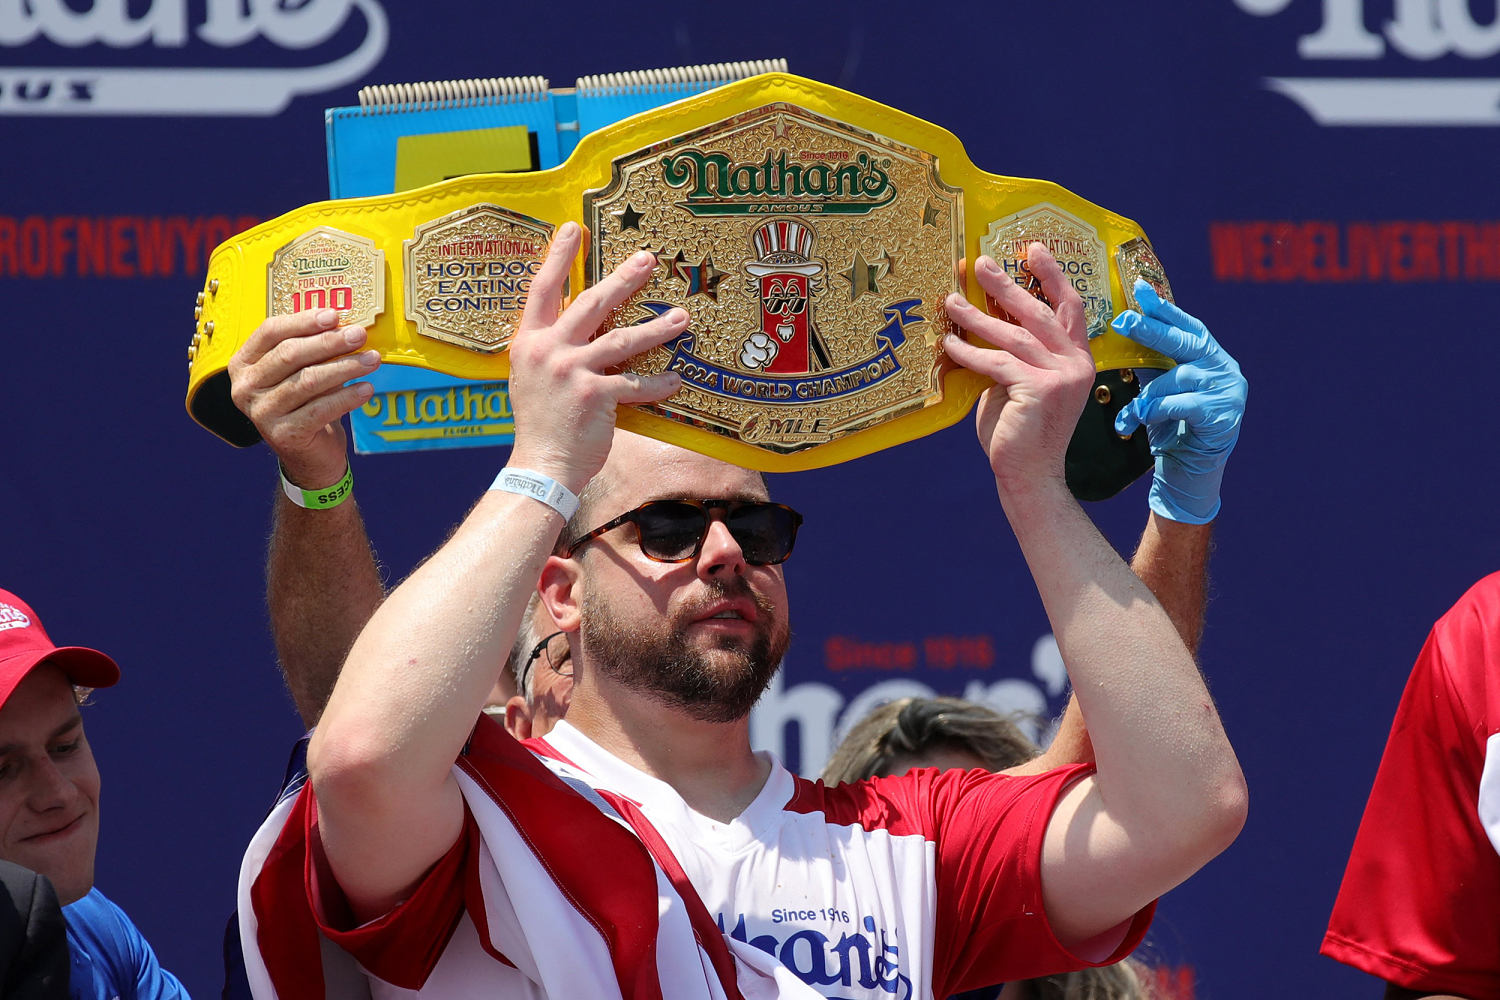 Patrick Bertoletti, Miki Sudo win Nathan’s hot dog eating contest as Joey Chestnut sits it out